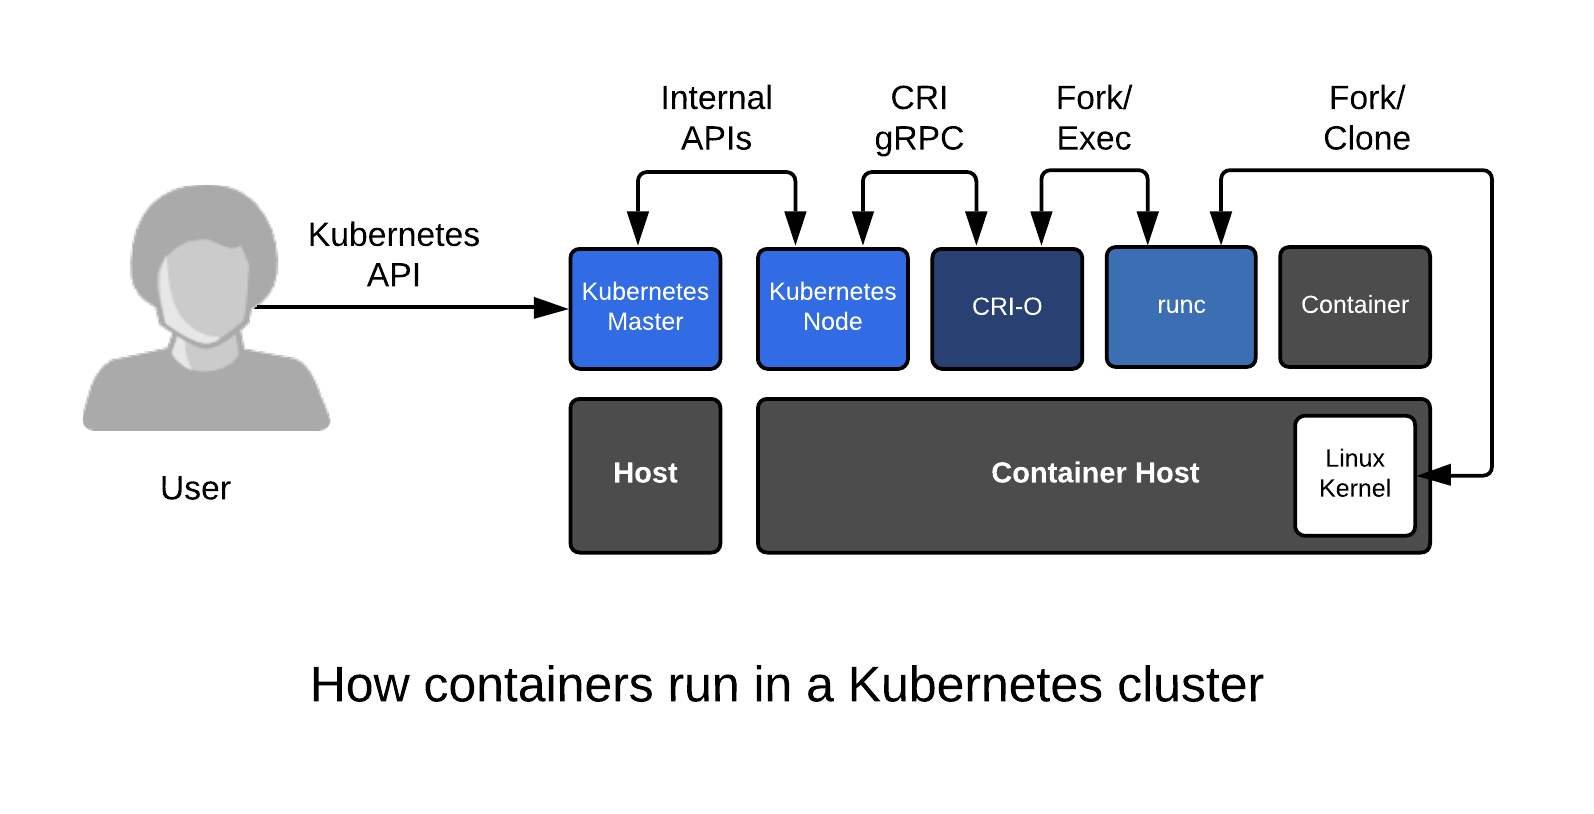 How containers run in a kubernetes cluster